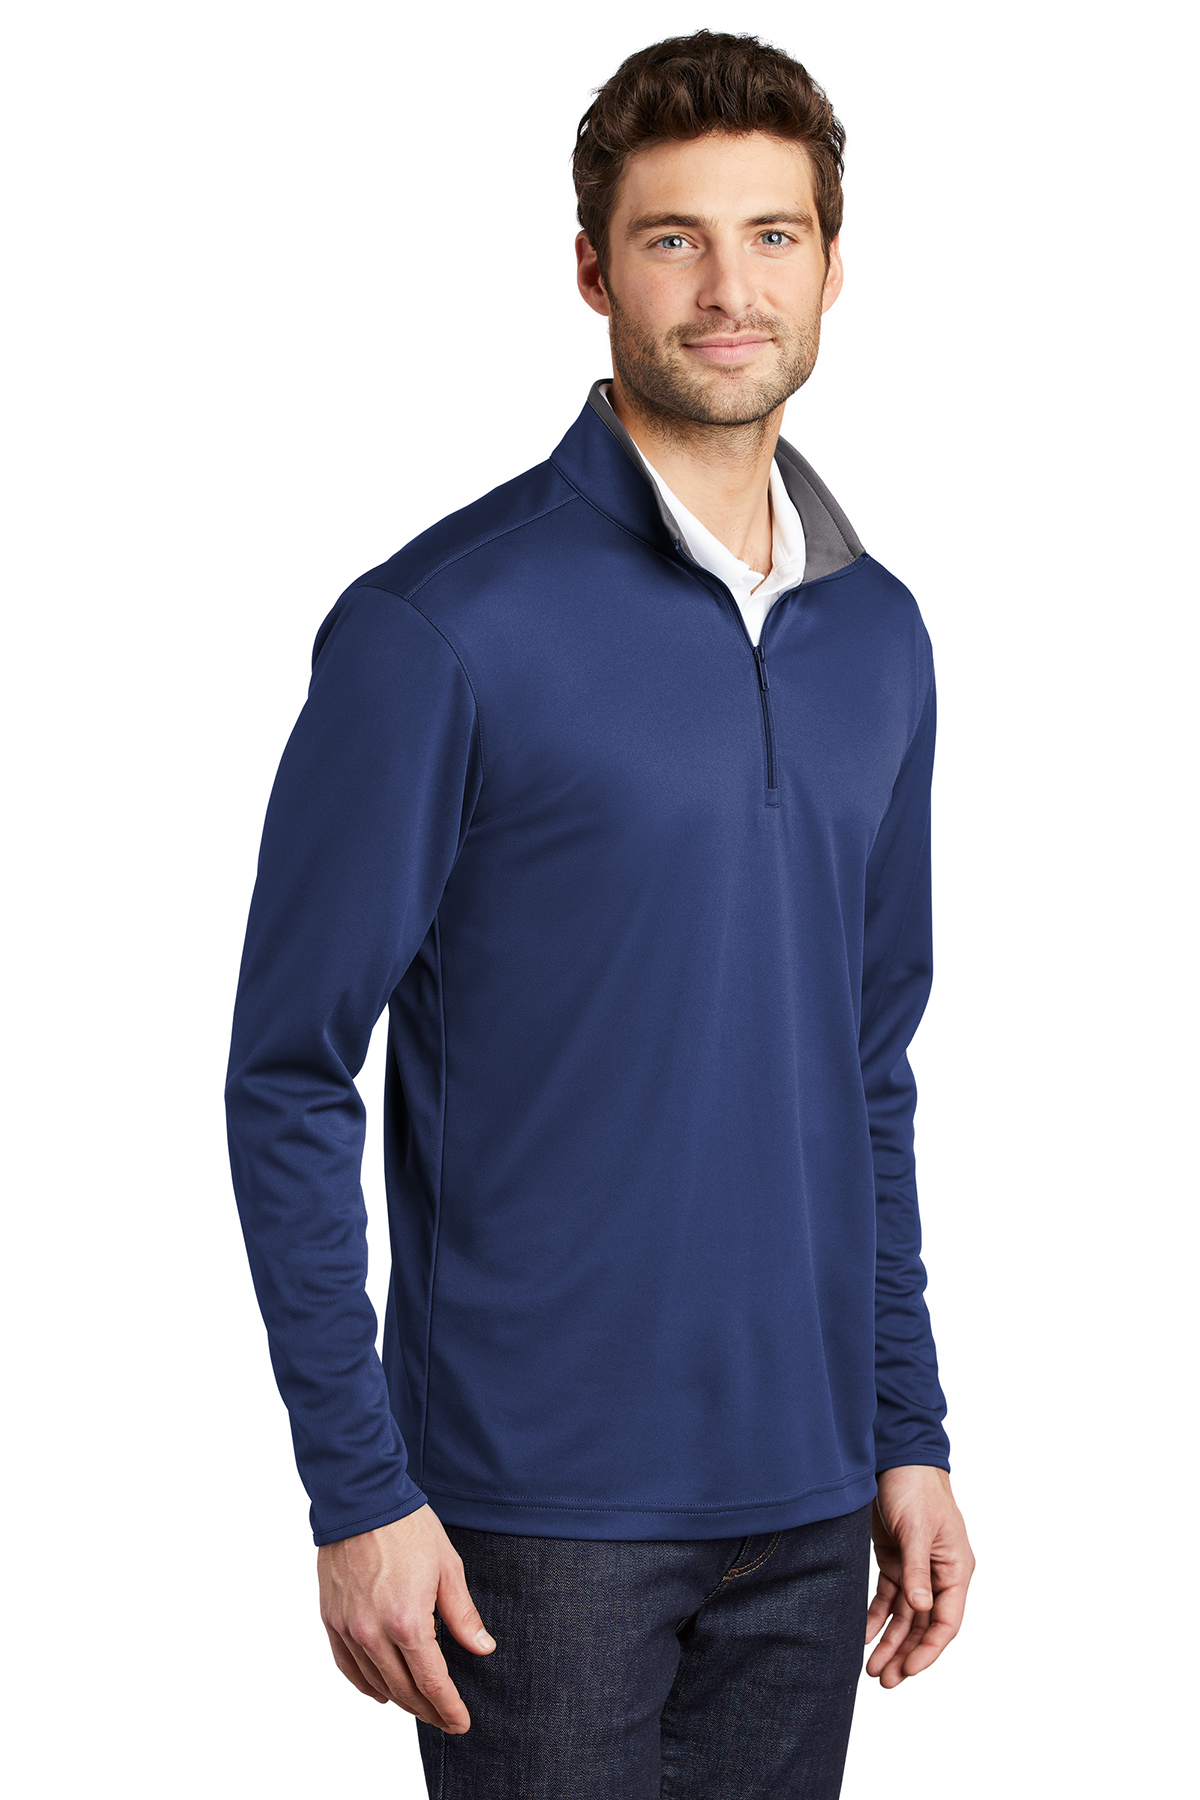 Port Authority Silk Touch Performance 1/4-Zip | Product | SanMar